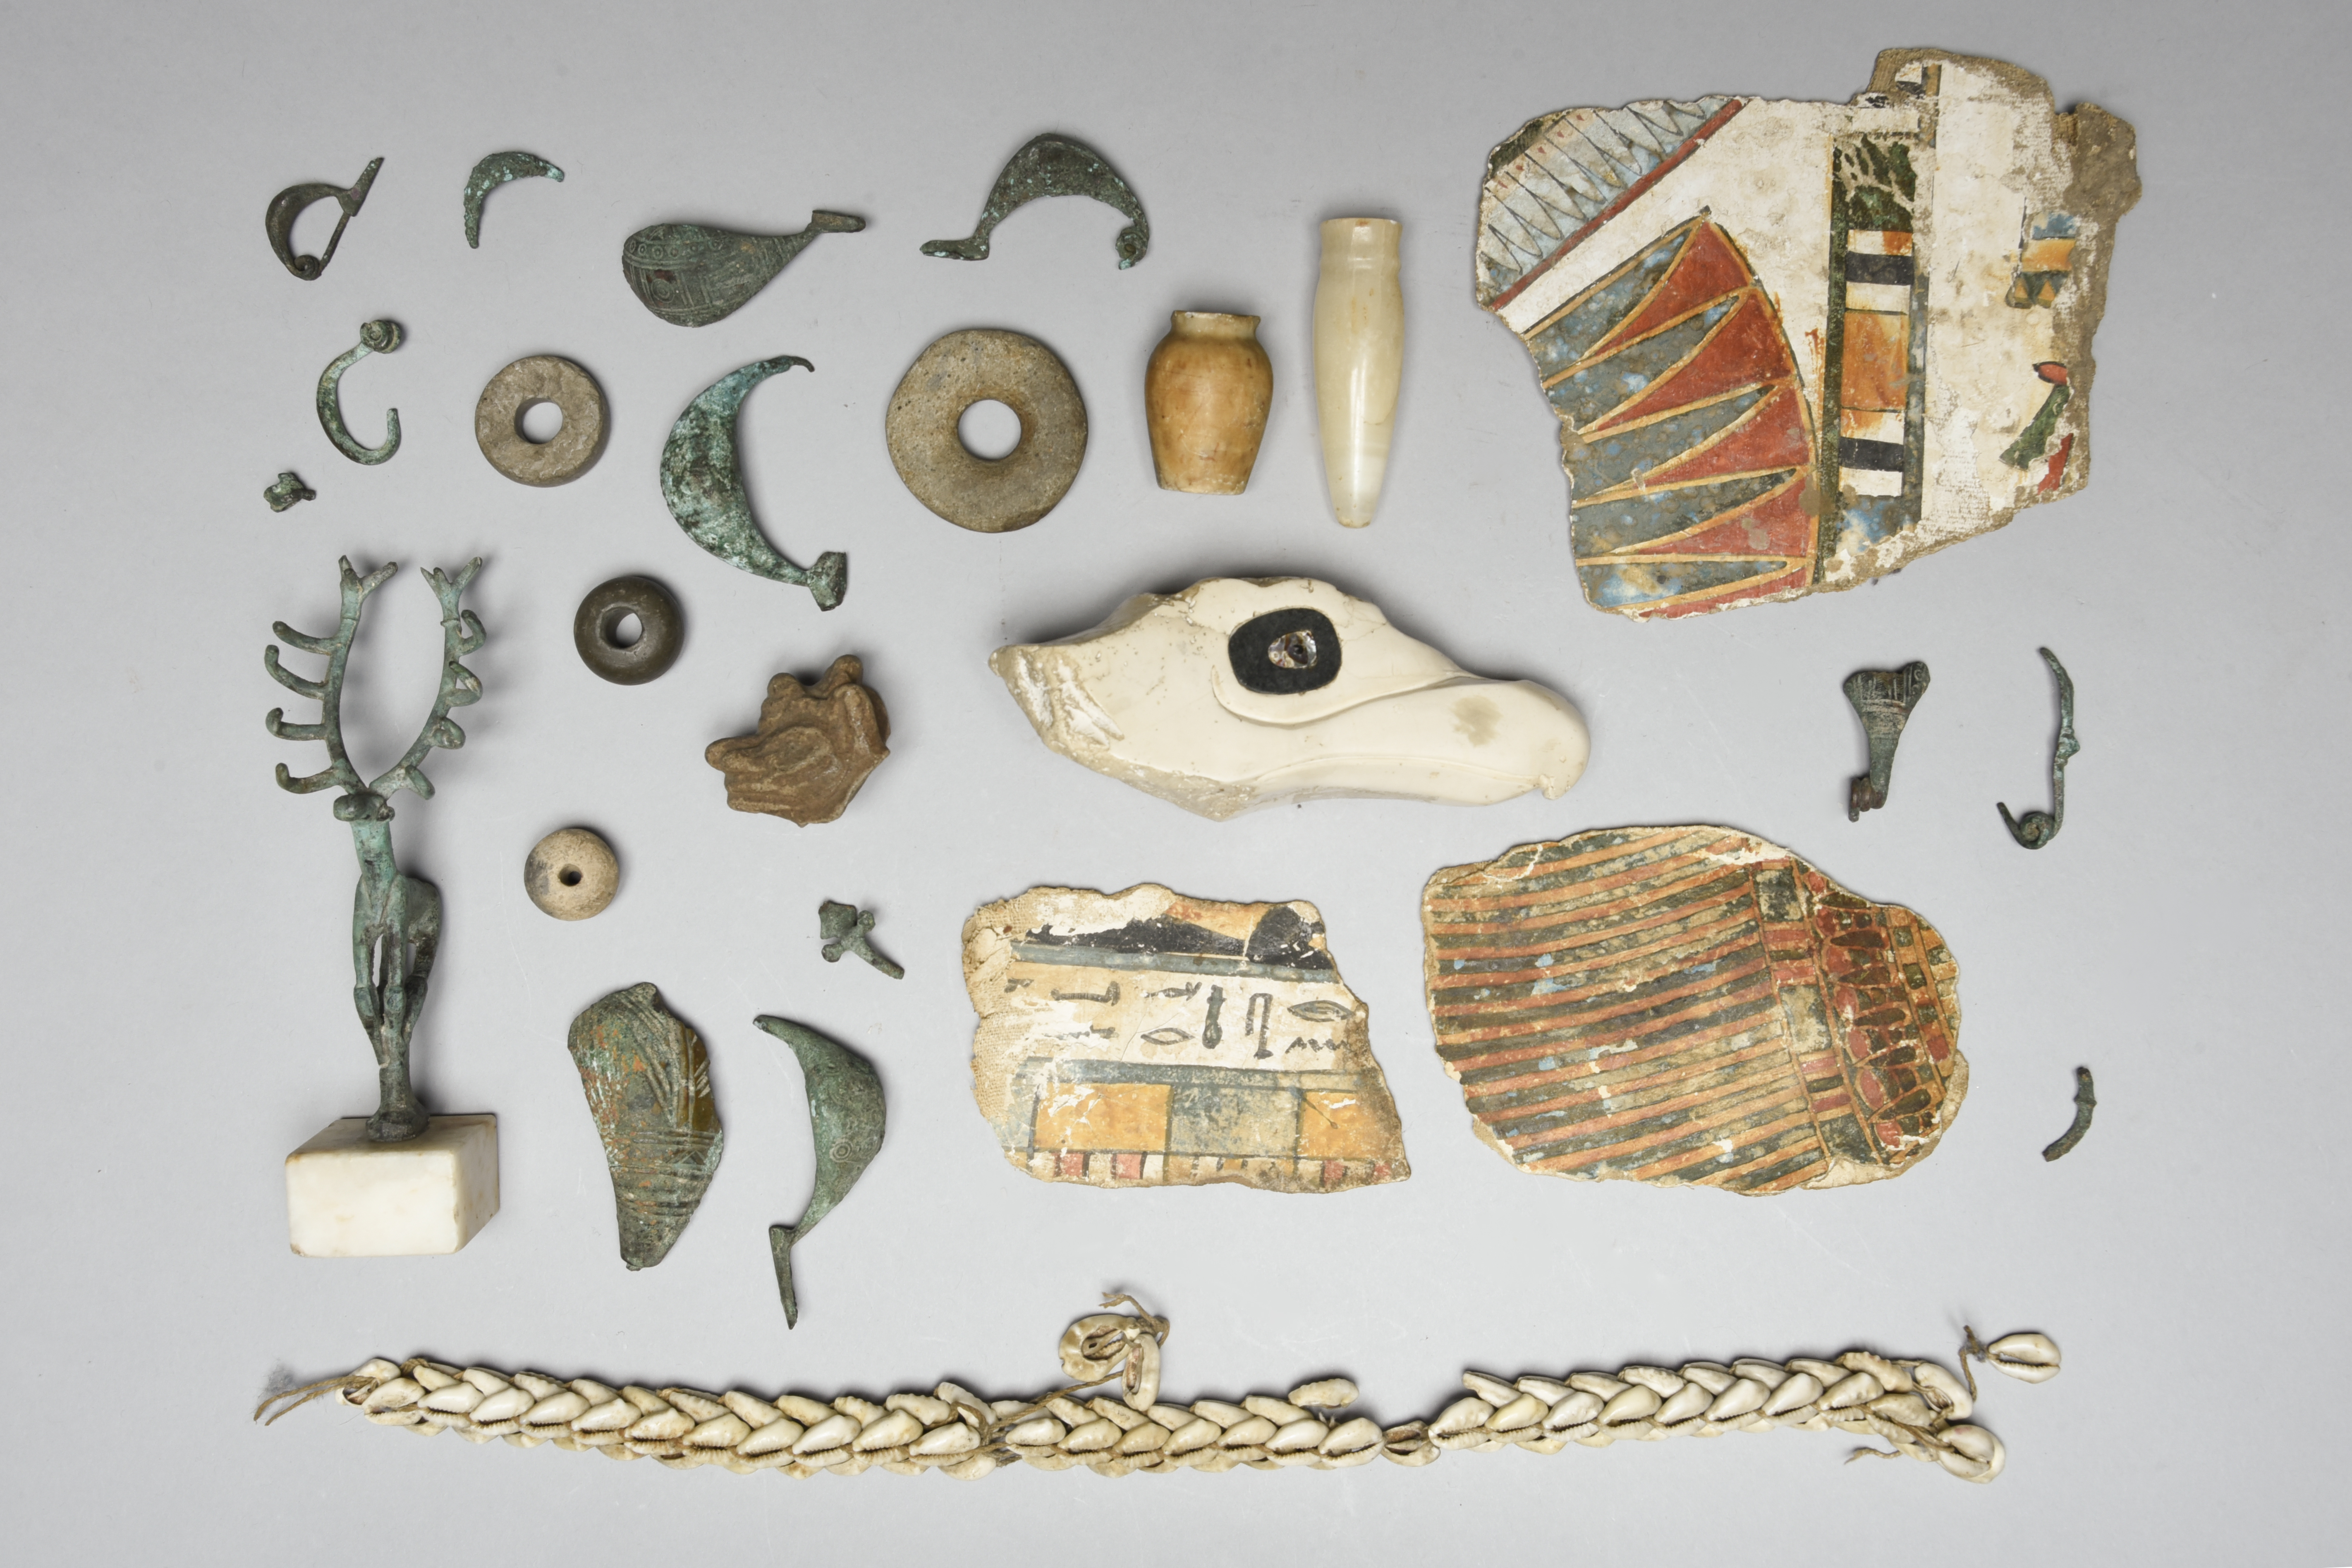 Three Egyptian painted cartonnage fragments